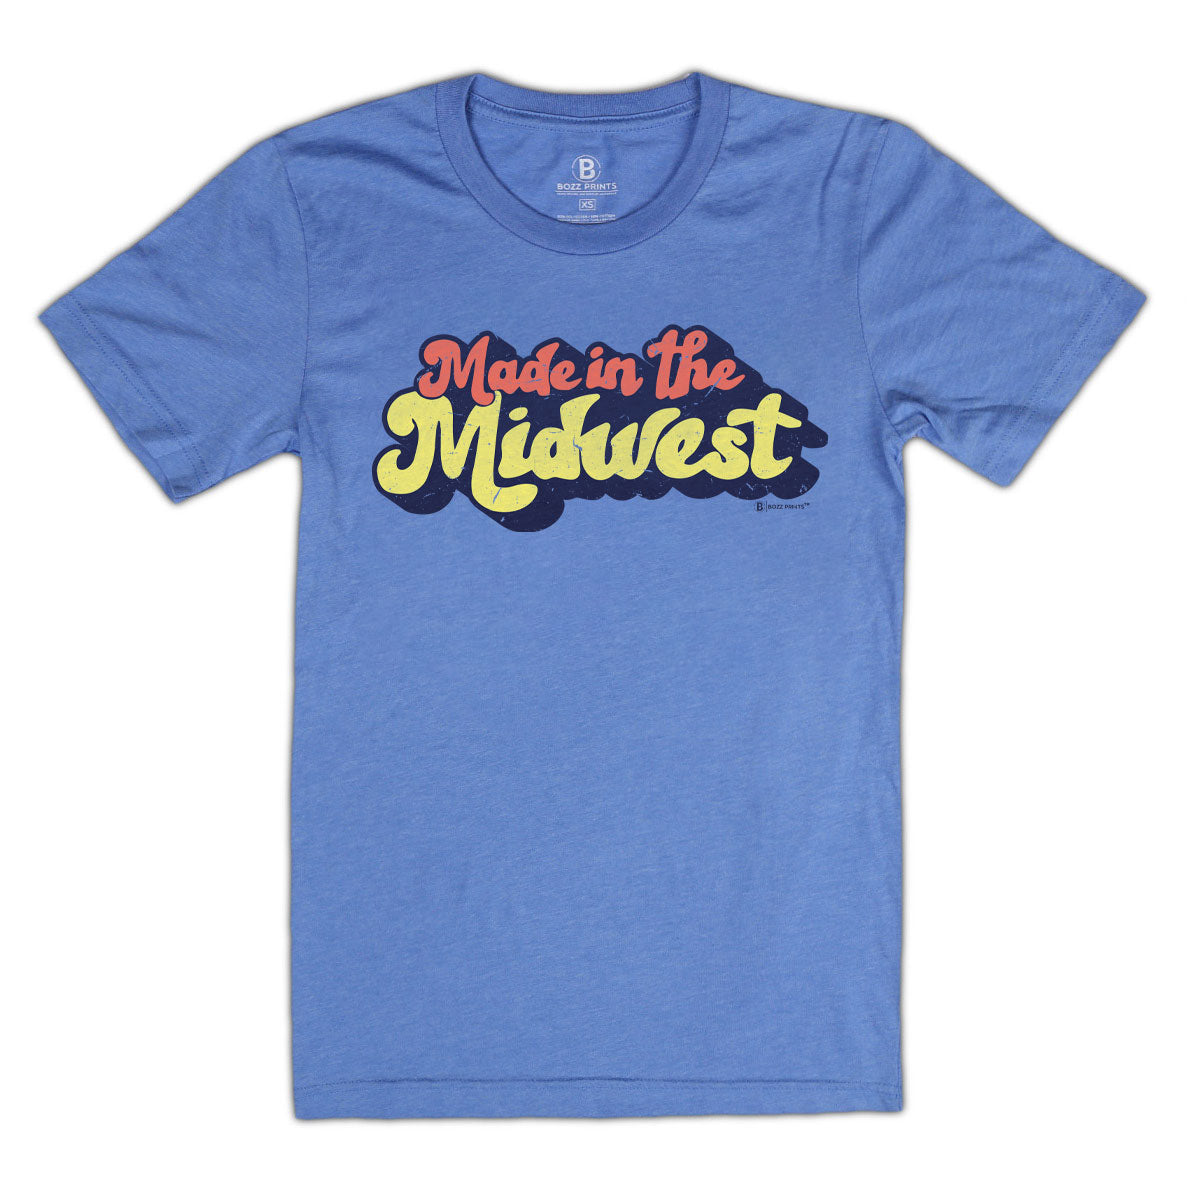 Made in the Midwest Retro T-Shirt